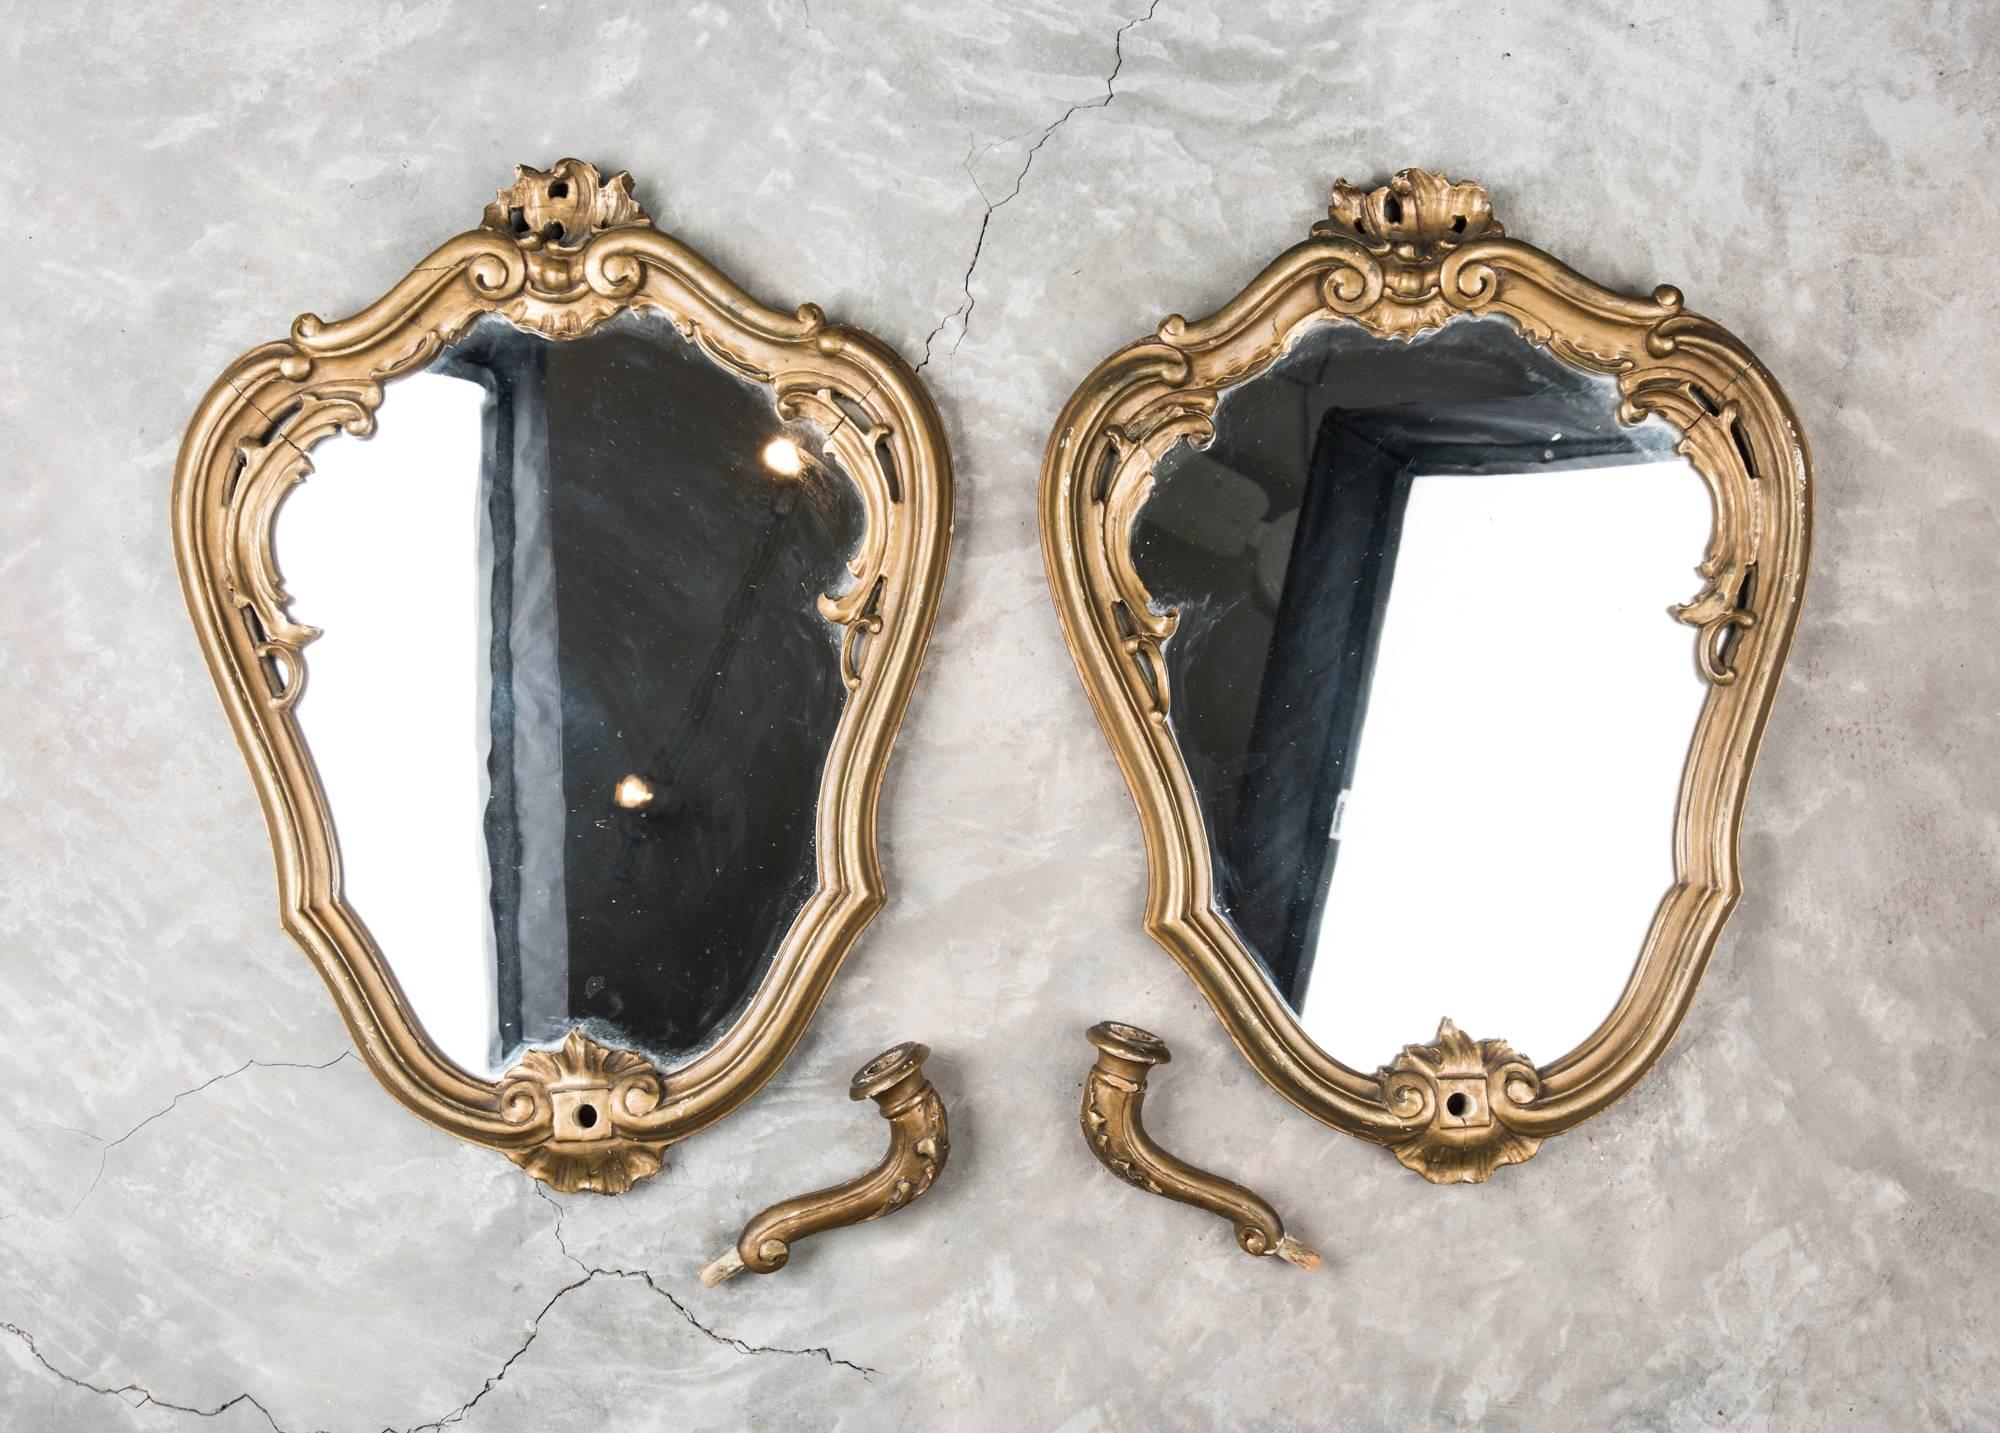 A dainty pair of gilt ended mirrors with removable candle holders. One mirror's glass is older than the other but both wooden frames are a pair and perfect for either side of a door way or fireplace.